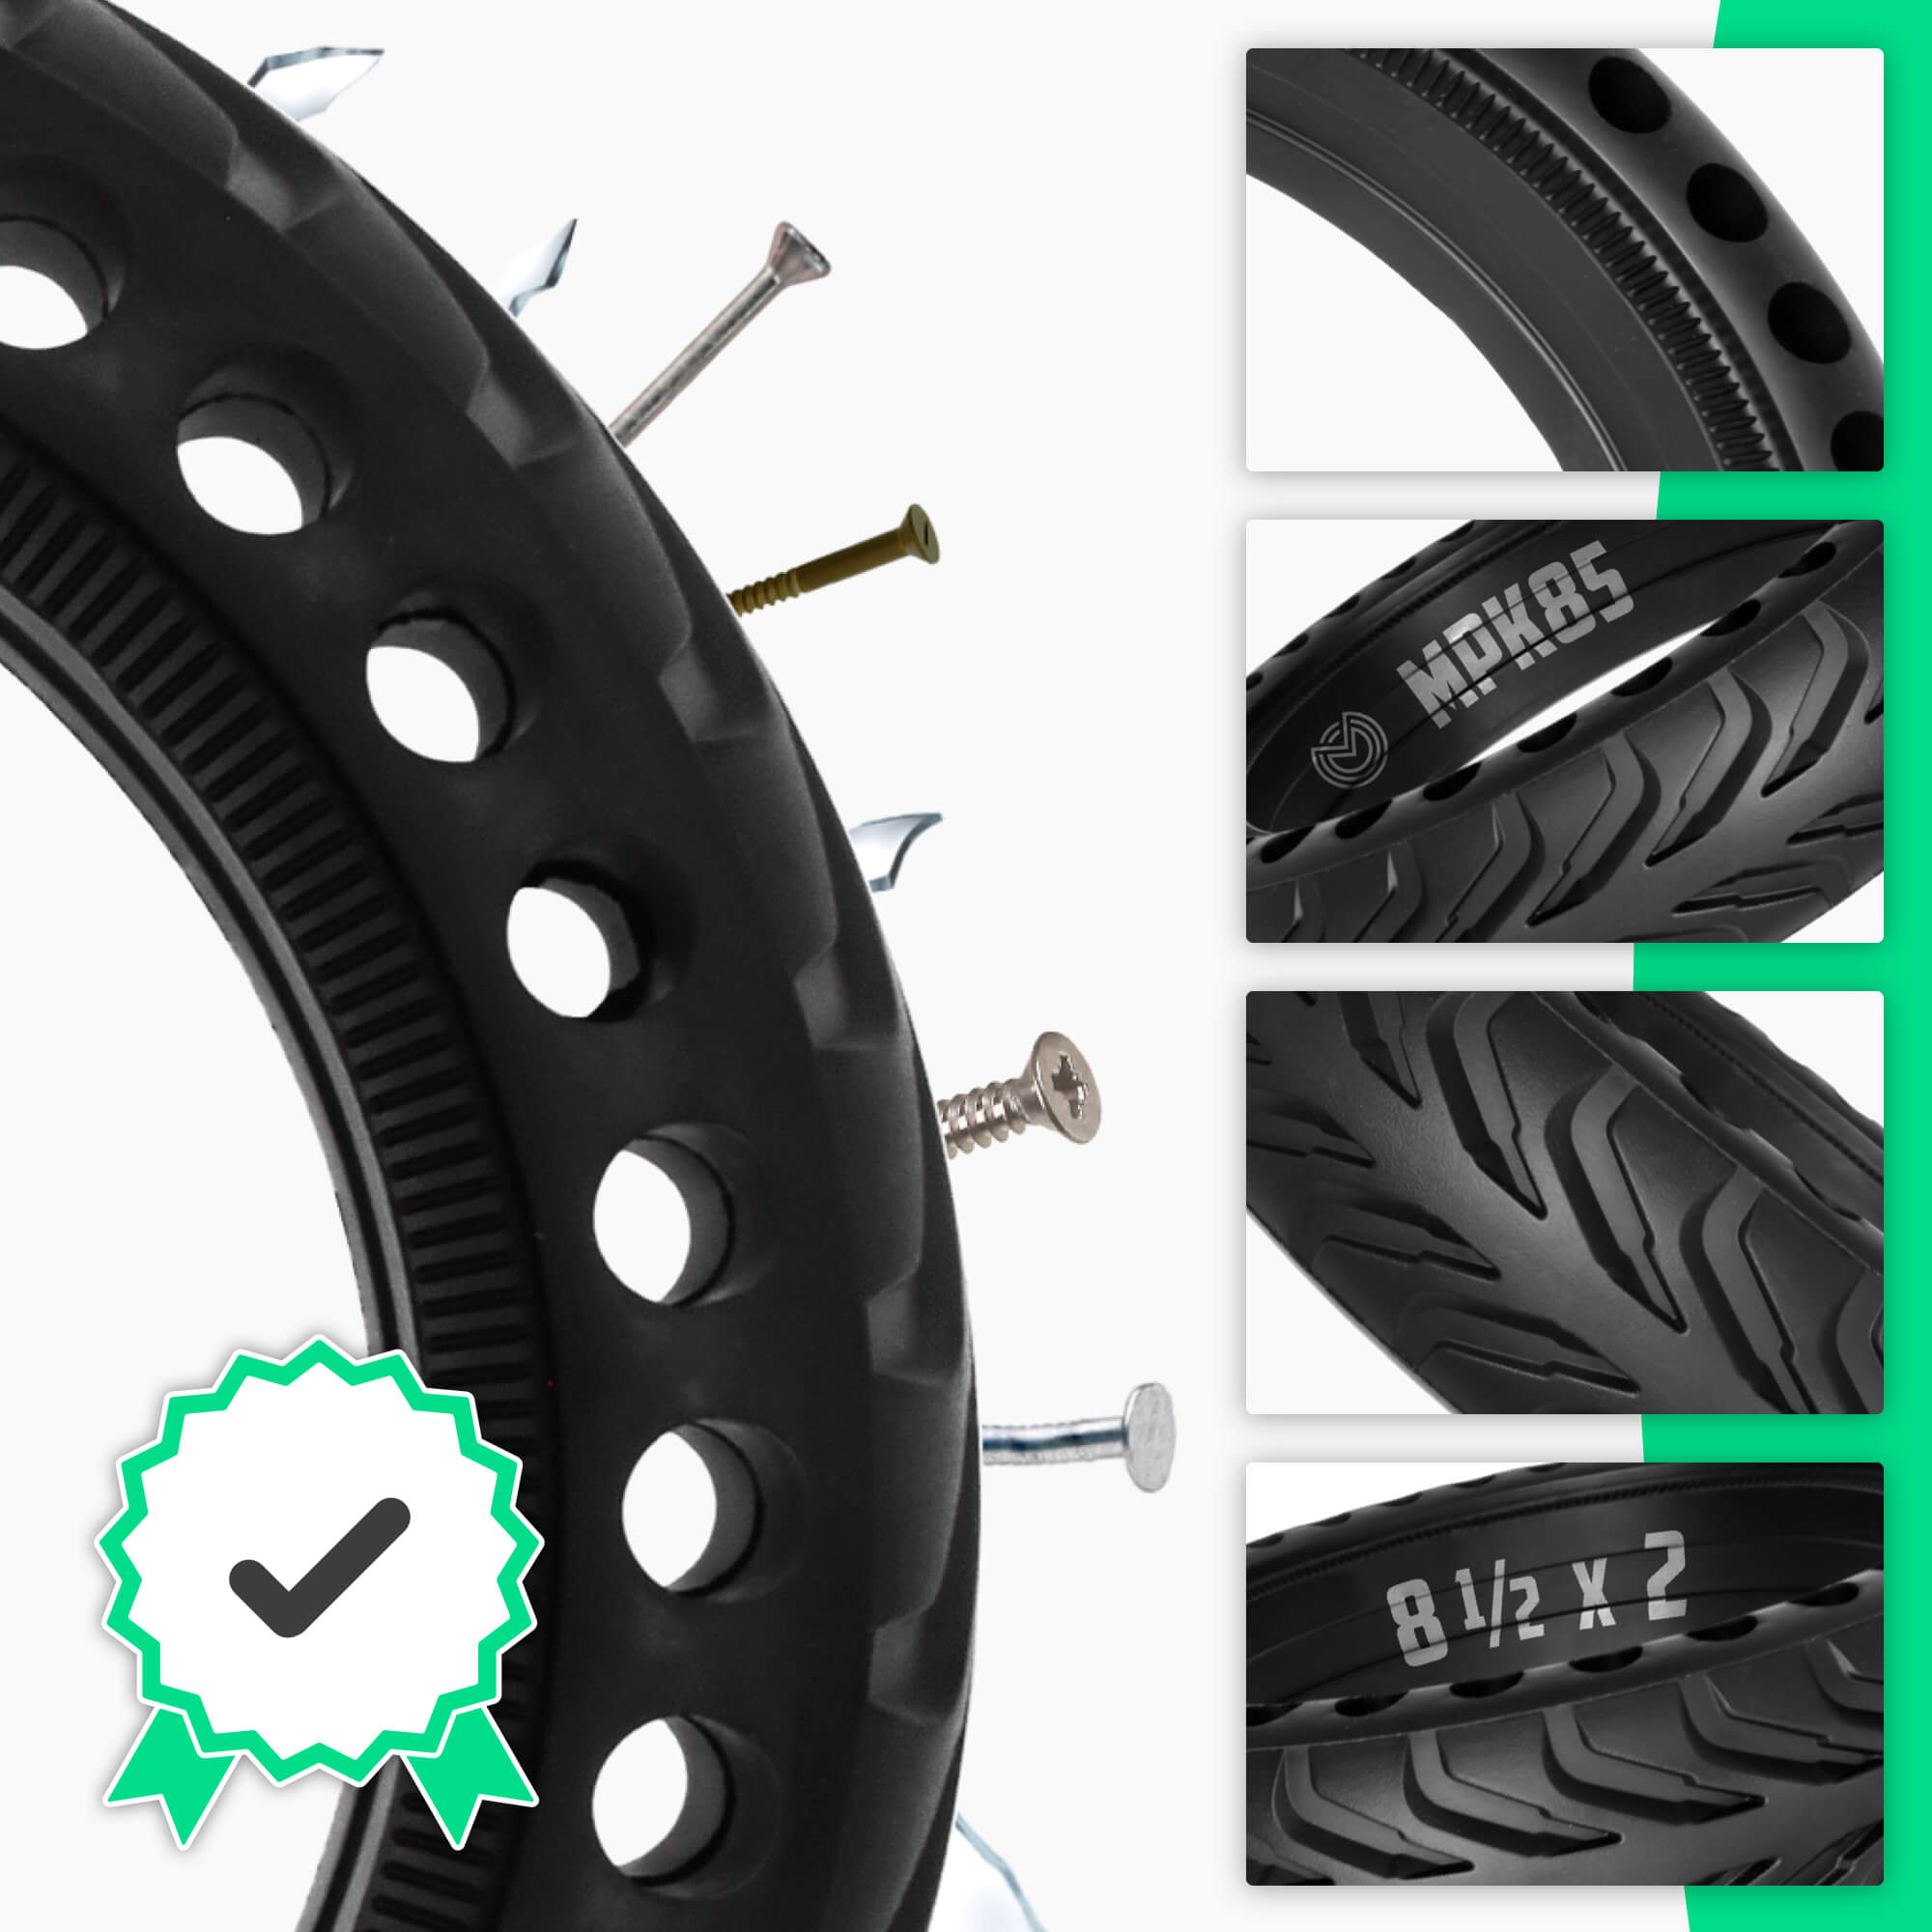 Solid tyre MPK85